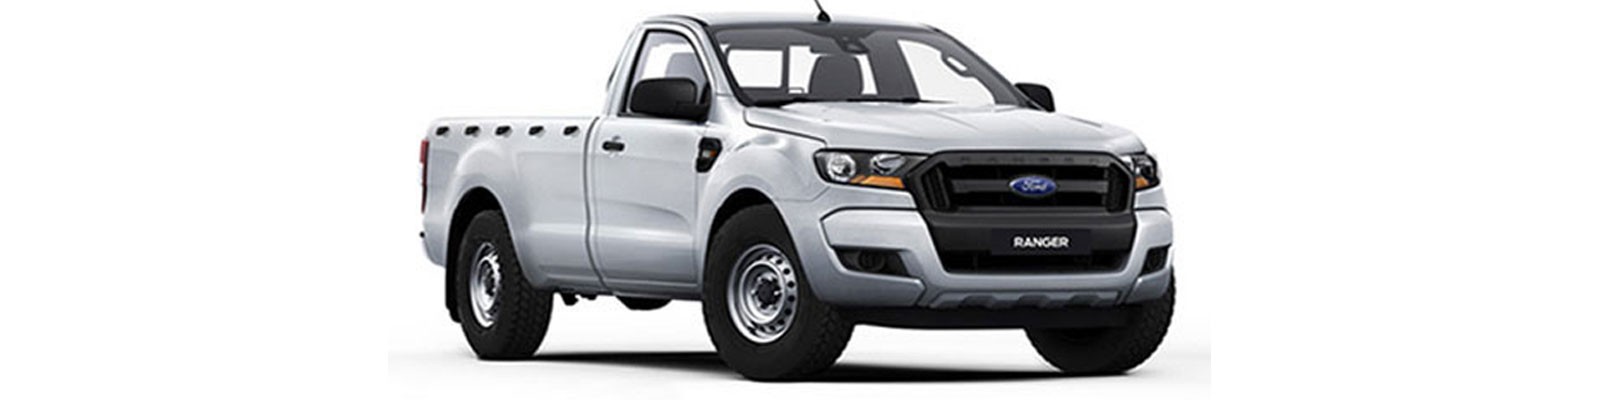 Accessories For The Ford Ranger Regular Cab 2016 to 2019